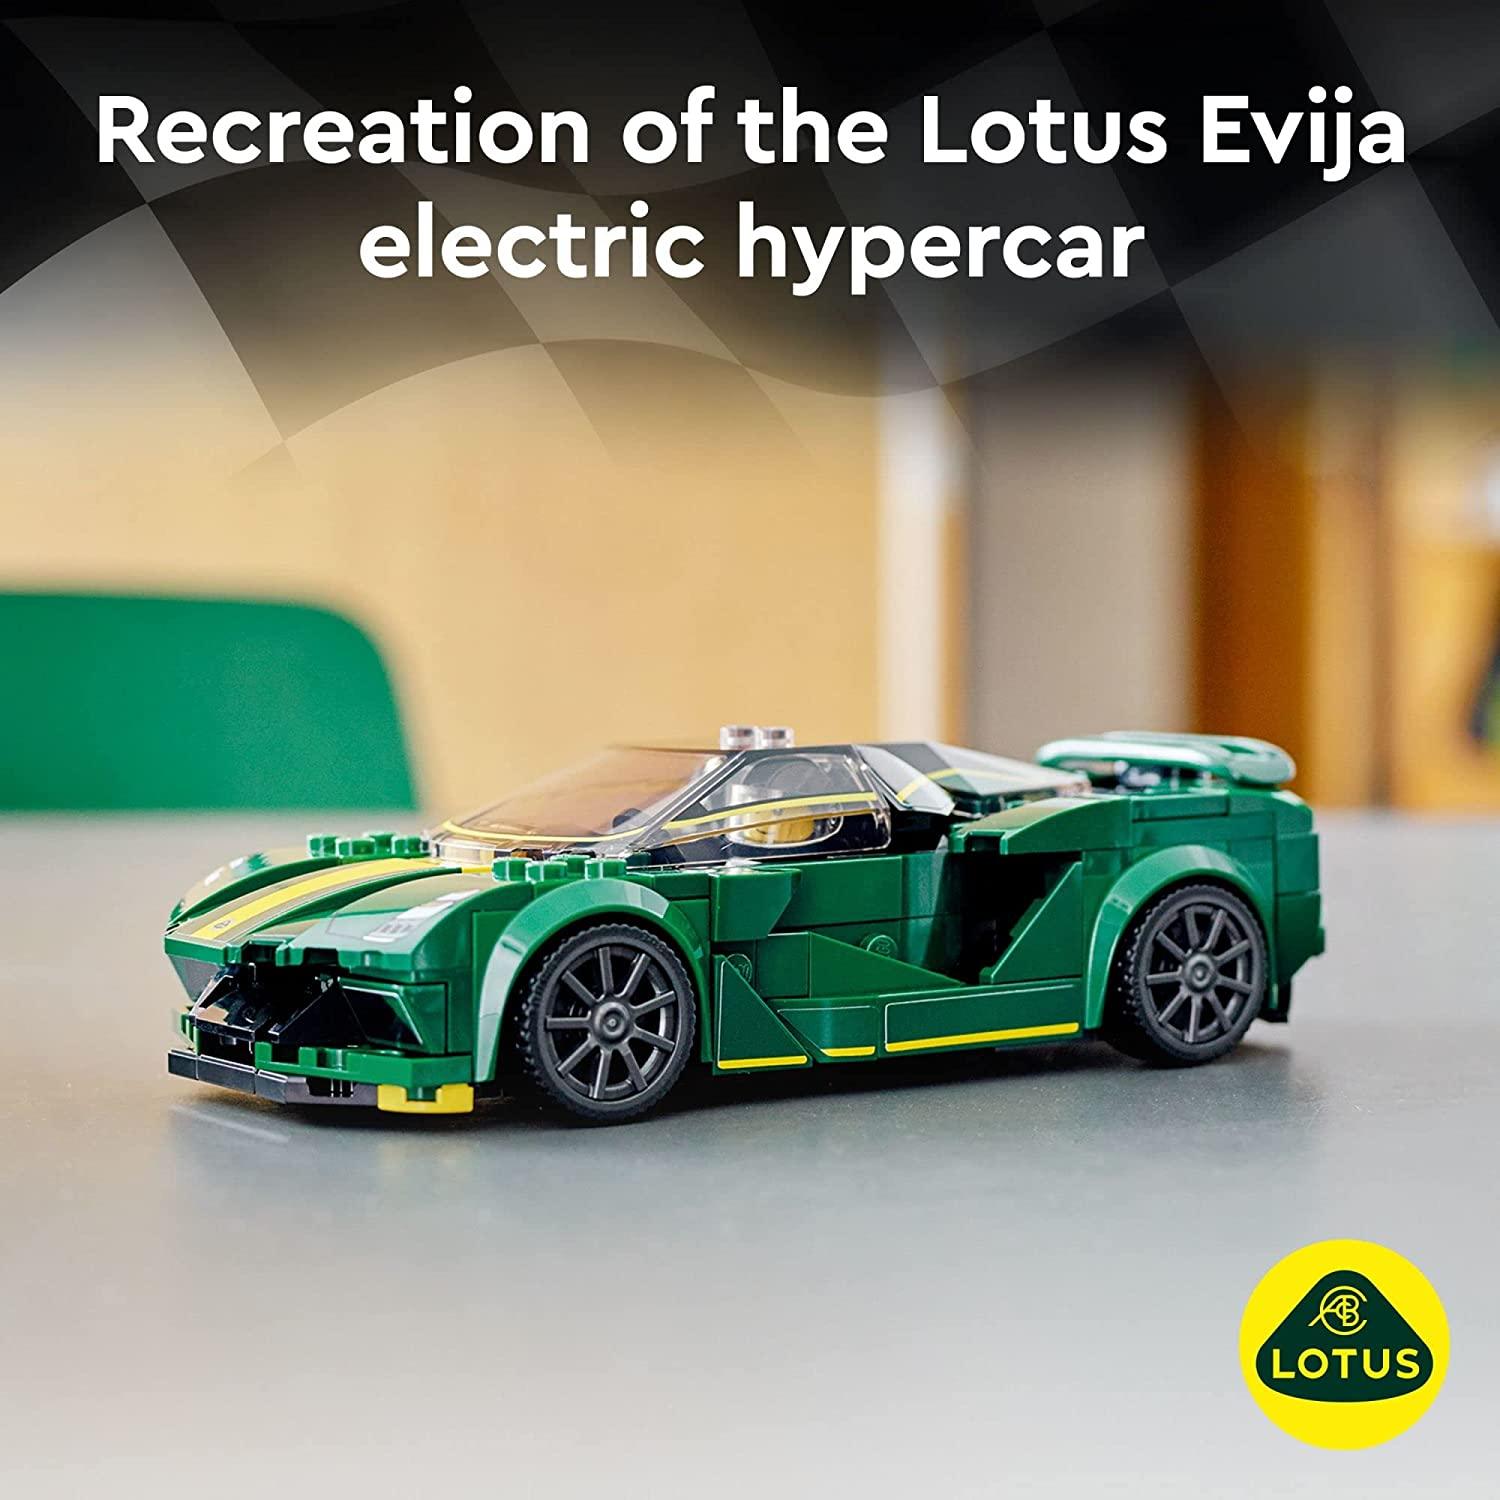 LEGO Speed Champions Lotus Evija Car Model Building Kit for Ages 8+ - FunCorp India